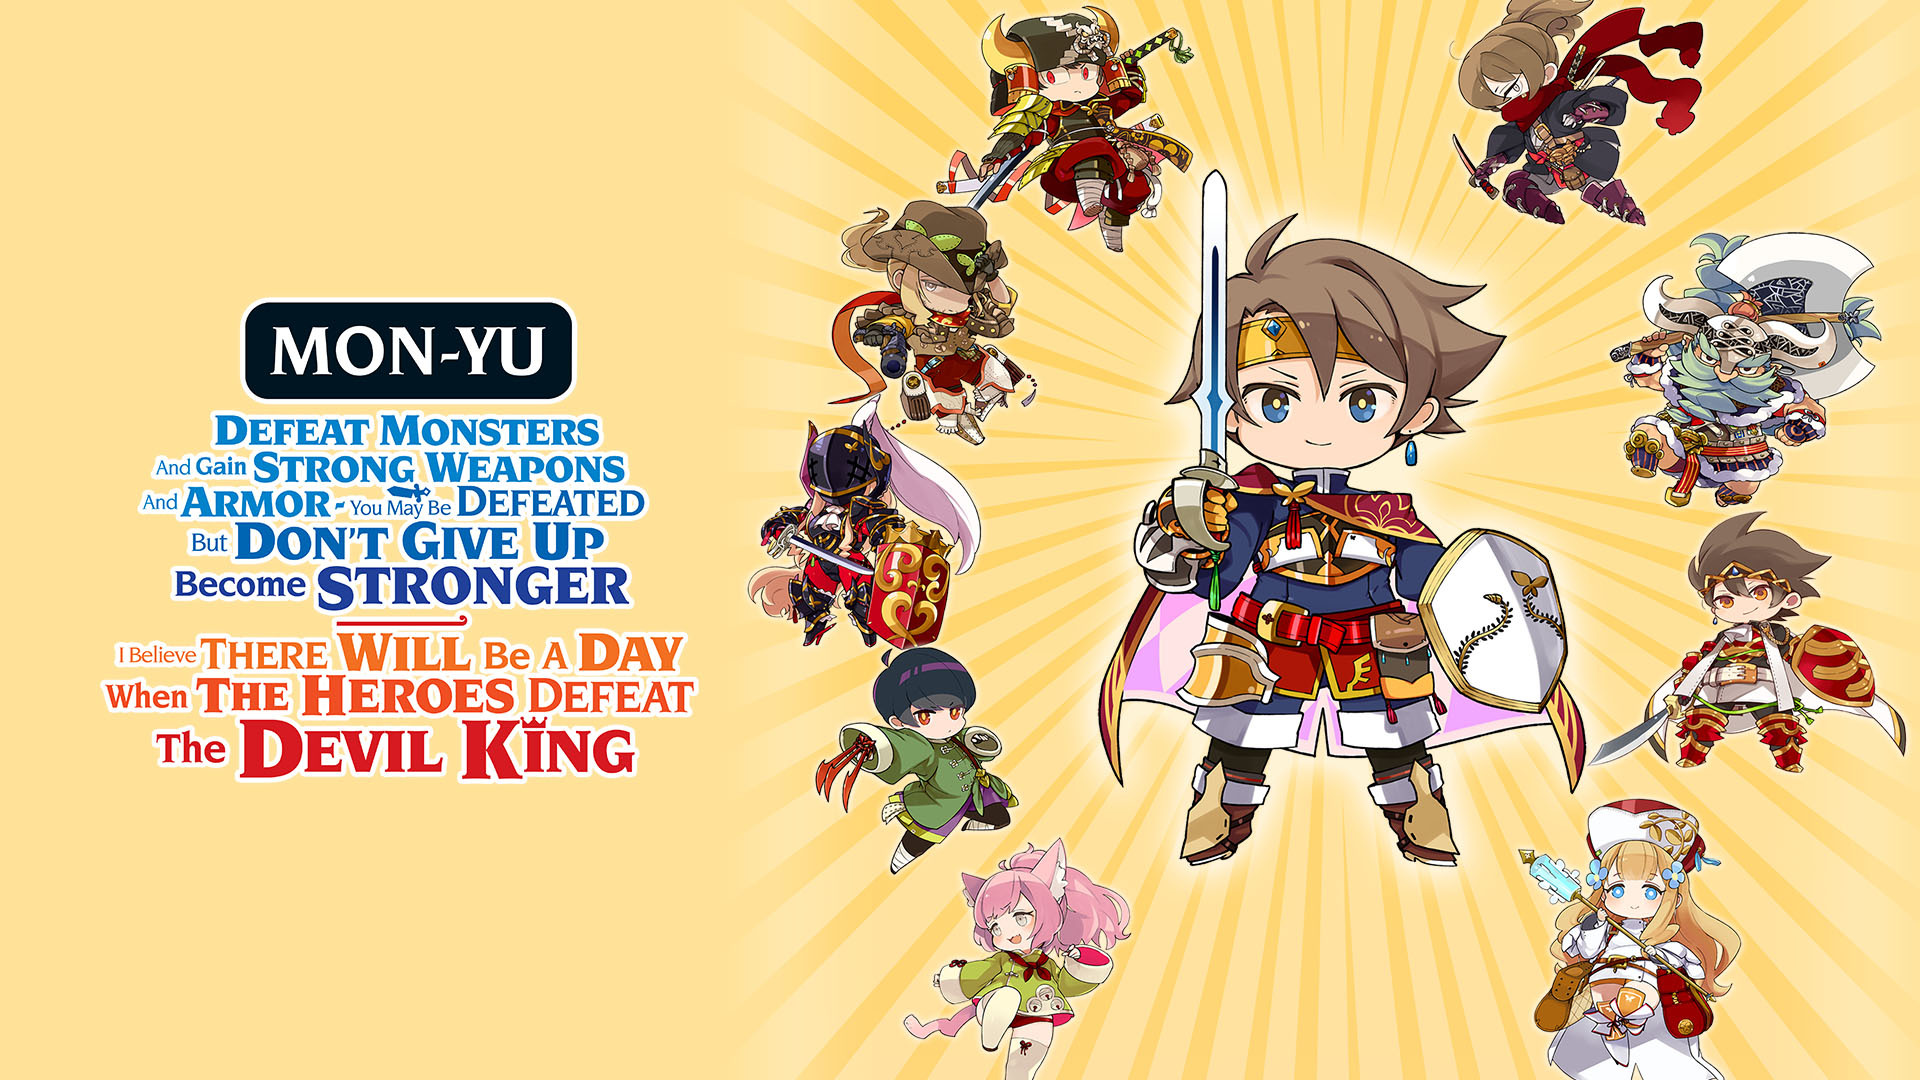 Mon-Yu: Defeat Monsters And Gain Strong Weapons And Armor. You May Be Defeated, But Don't Give Up. Become Stronger. I Believe There Will Be A Day When The Heroes Defeat The Devil King